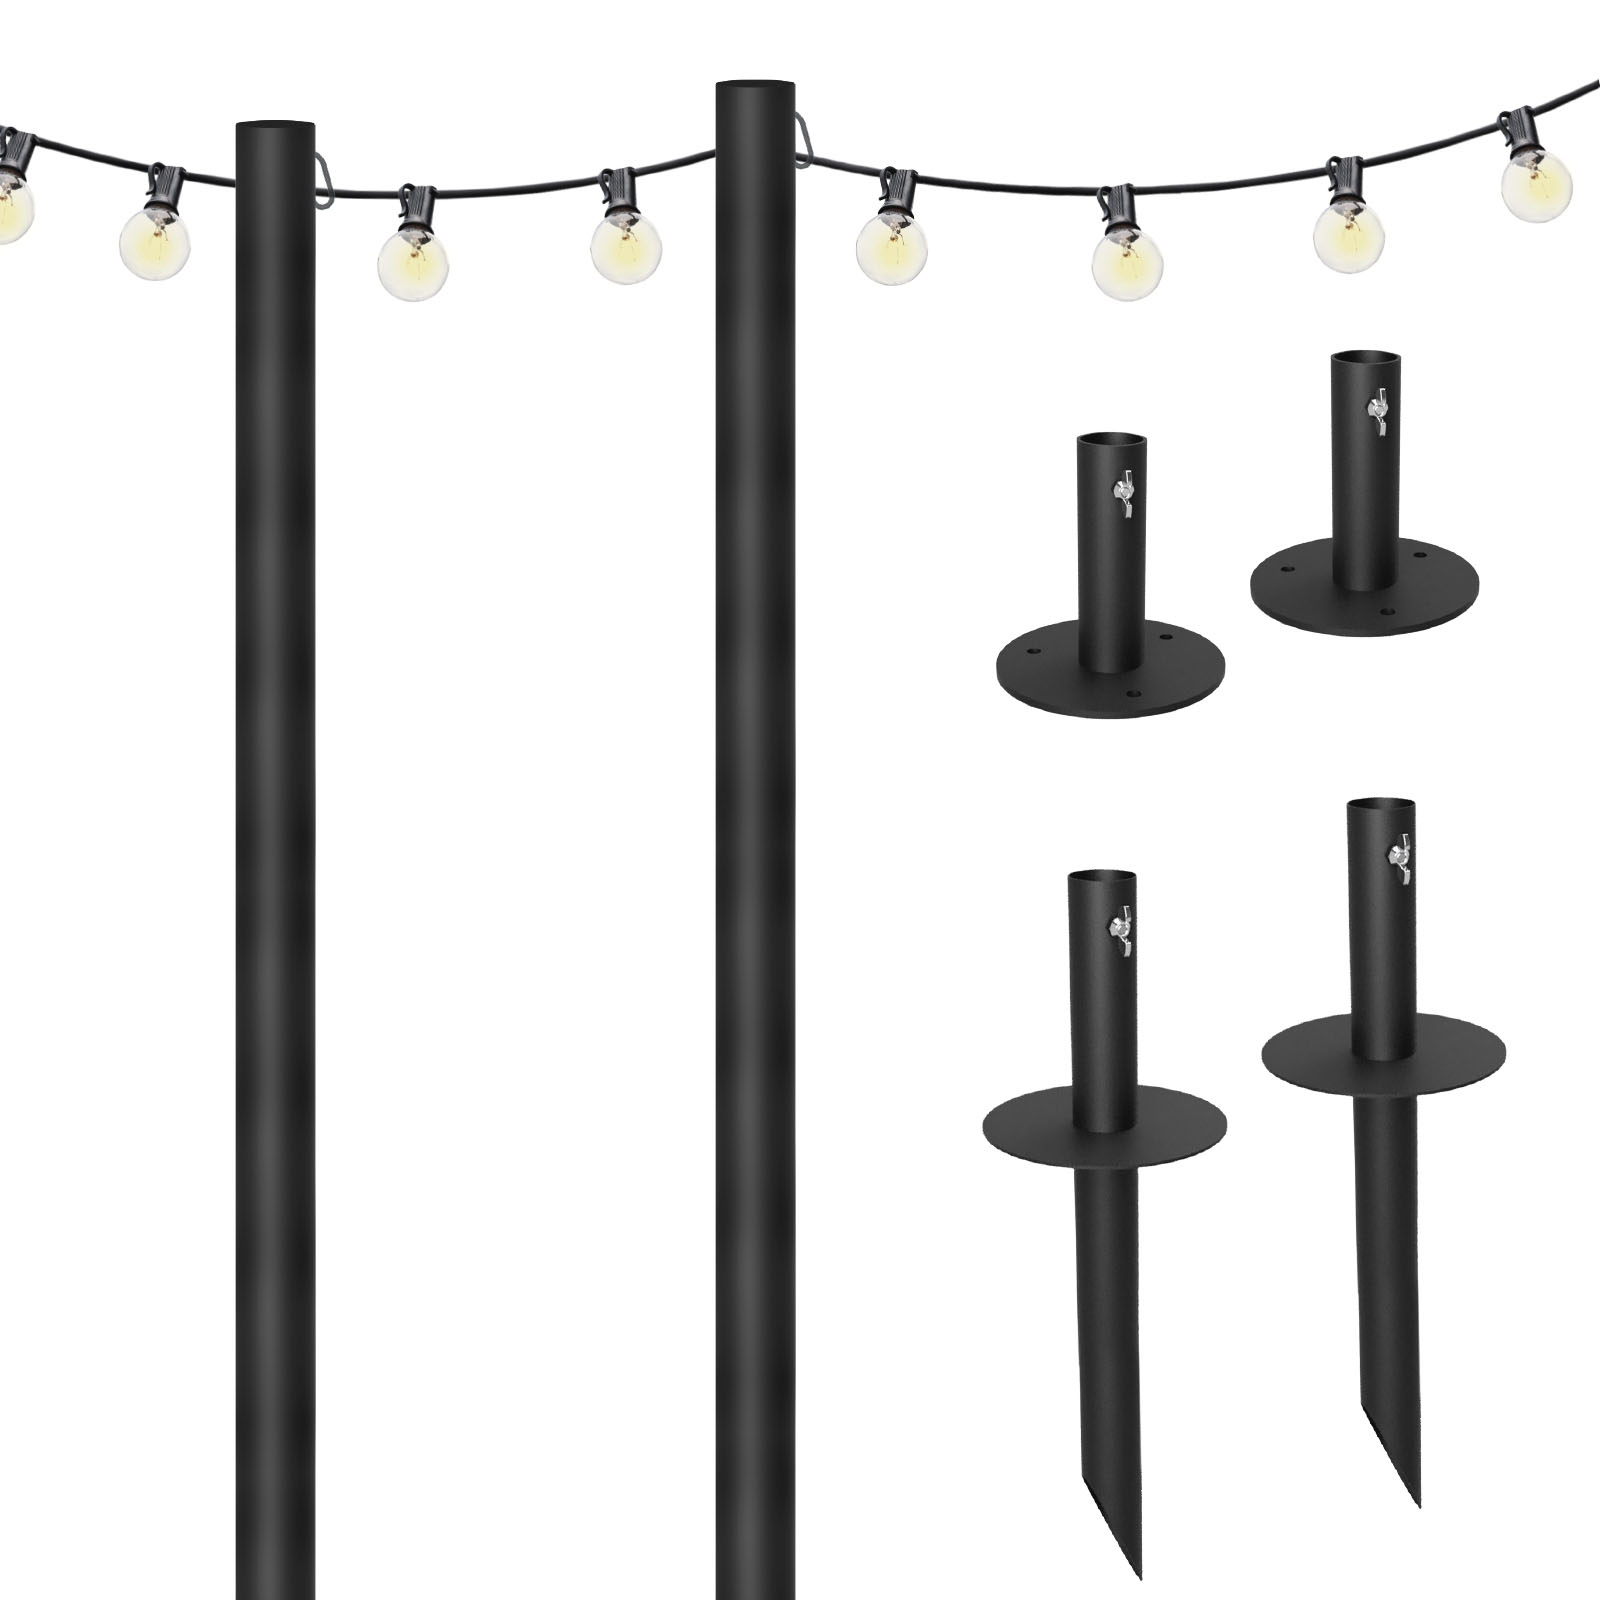 Angle View: Excello Global Products - Bistro String Light Poles - 2 Pack - Extends to 10 Feet - 50 Feet of String Lights Included - Black